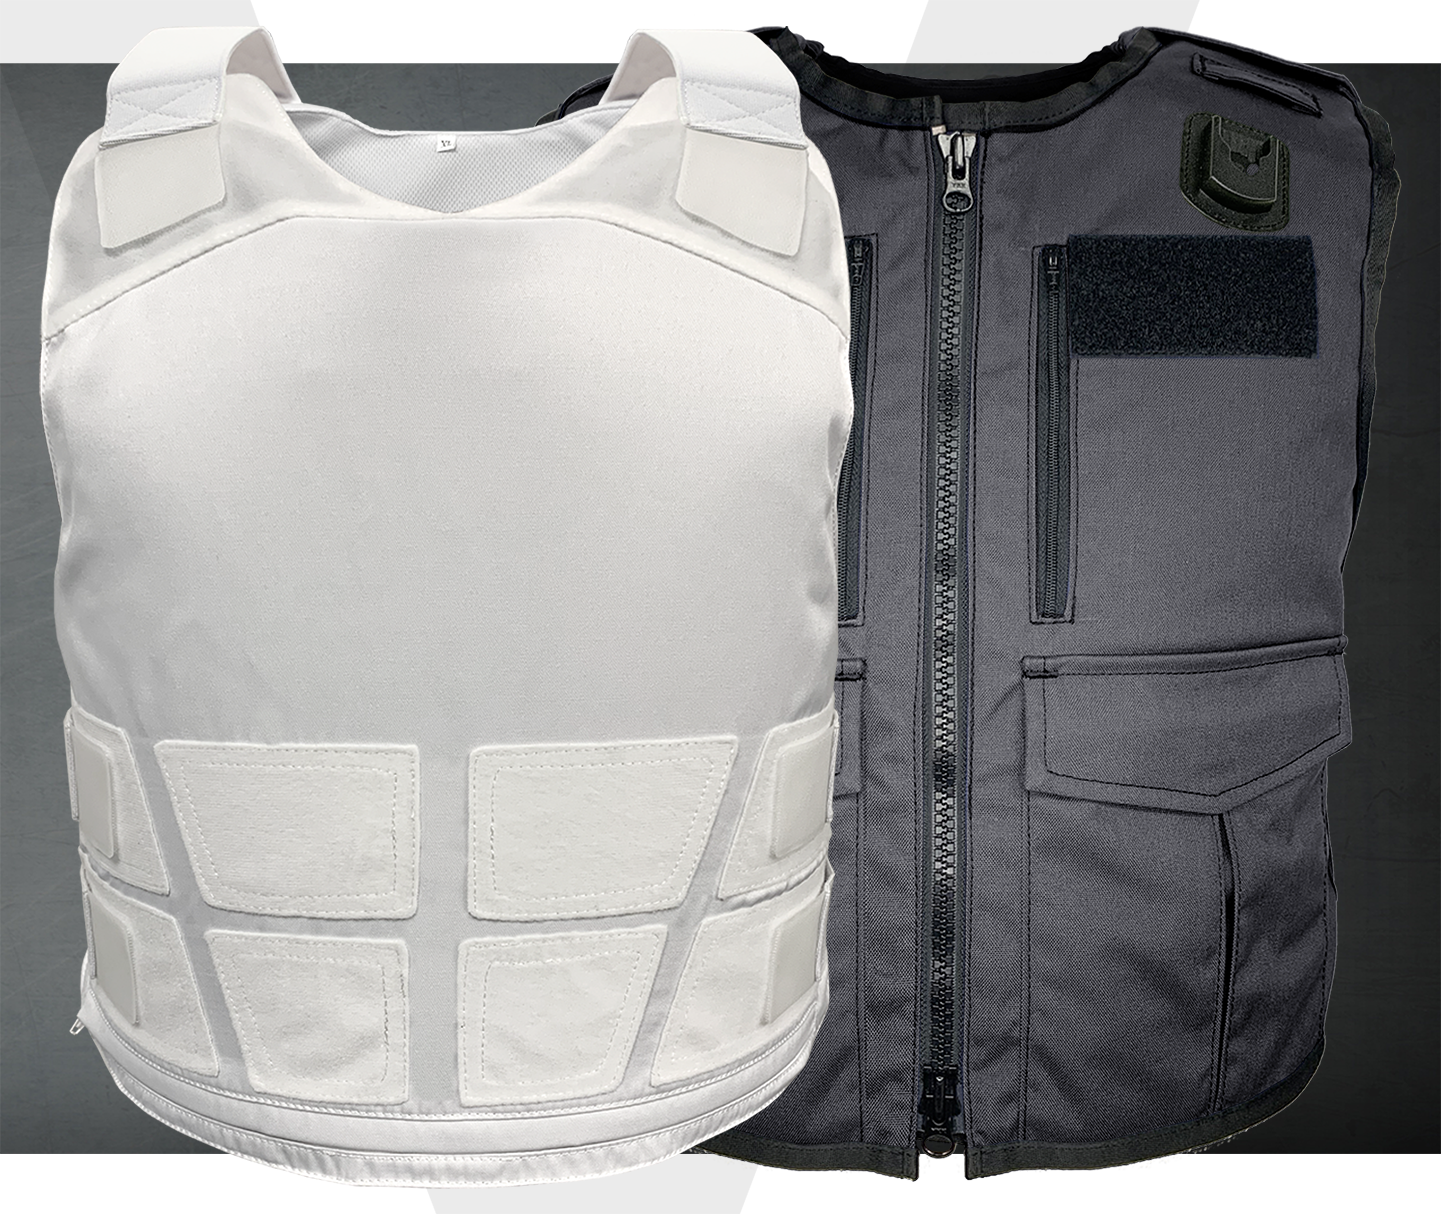 Stab and Spike Body Armour